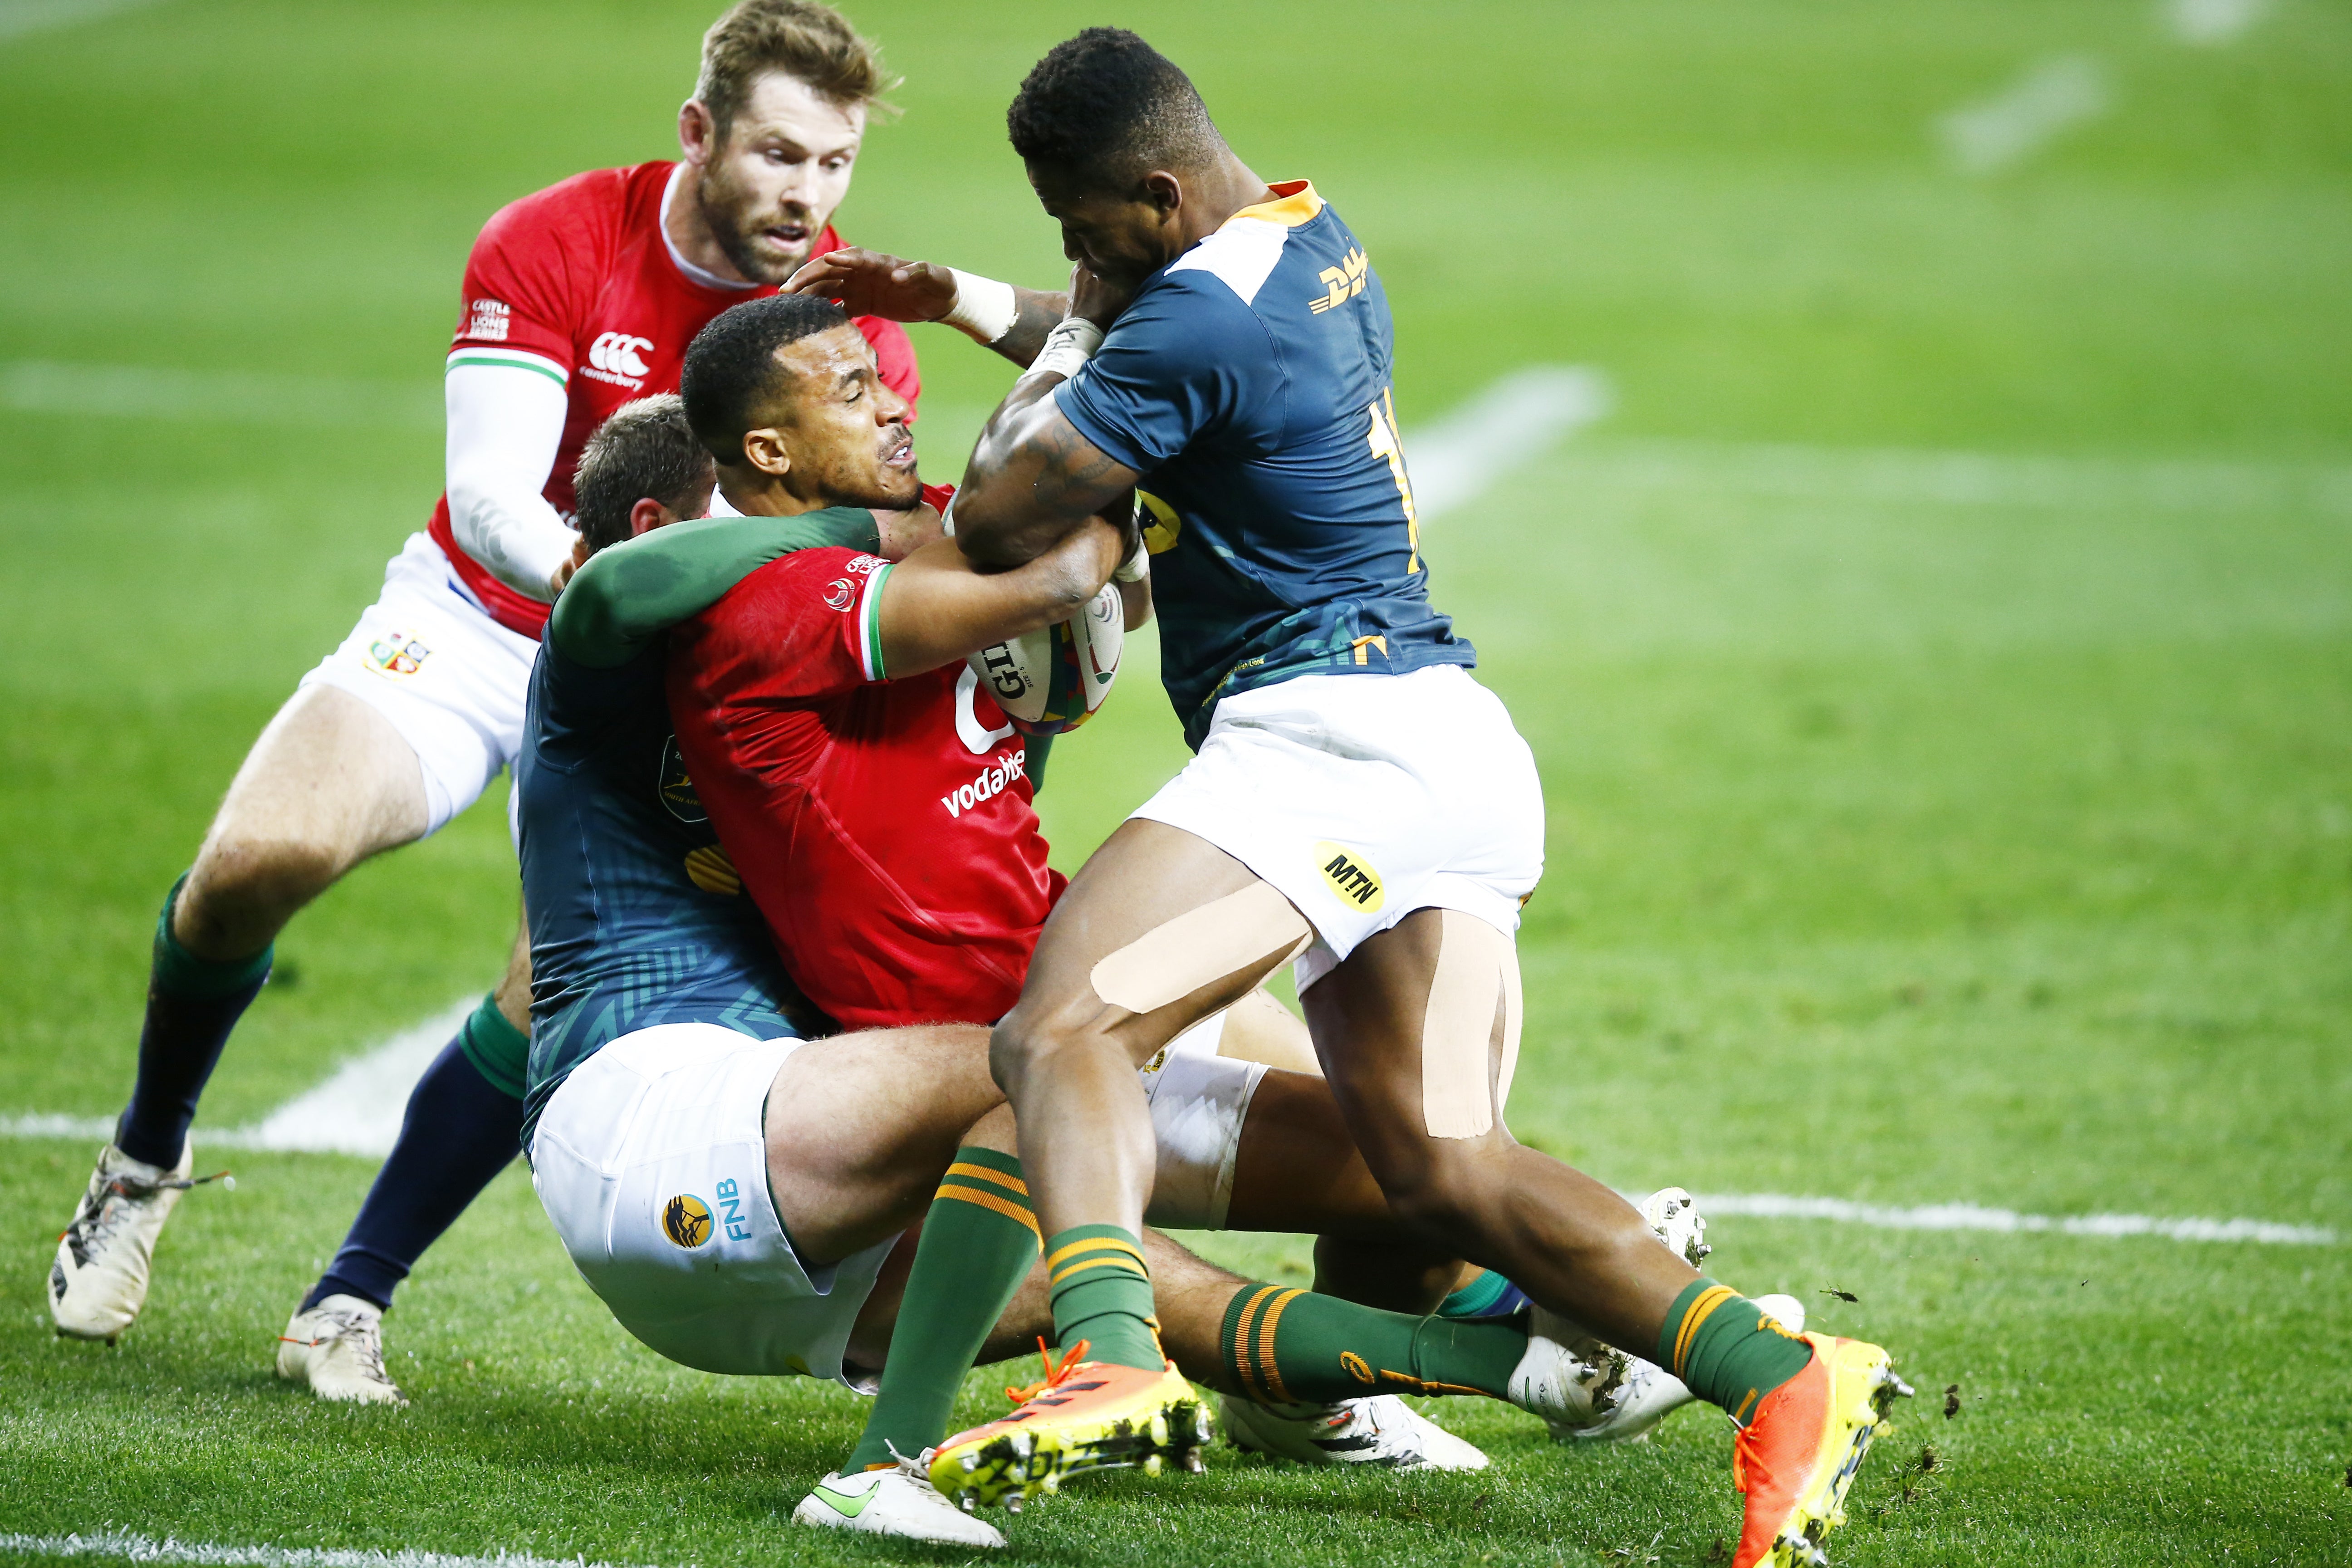 The Lions were beaten by an experienced South Africa ‘A’ side in Cape Town